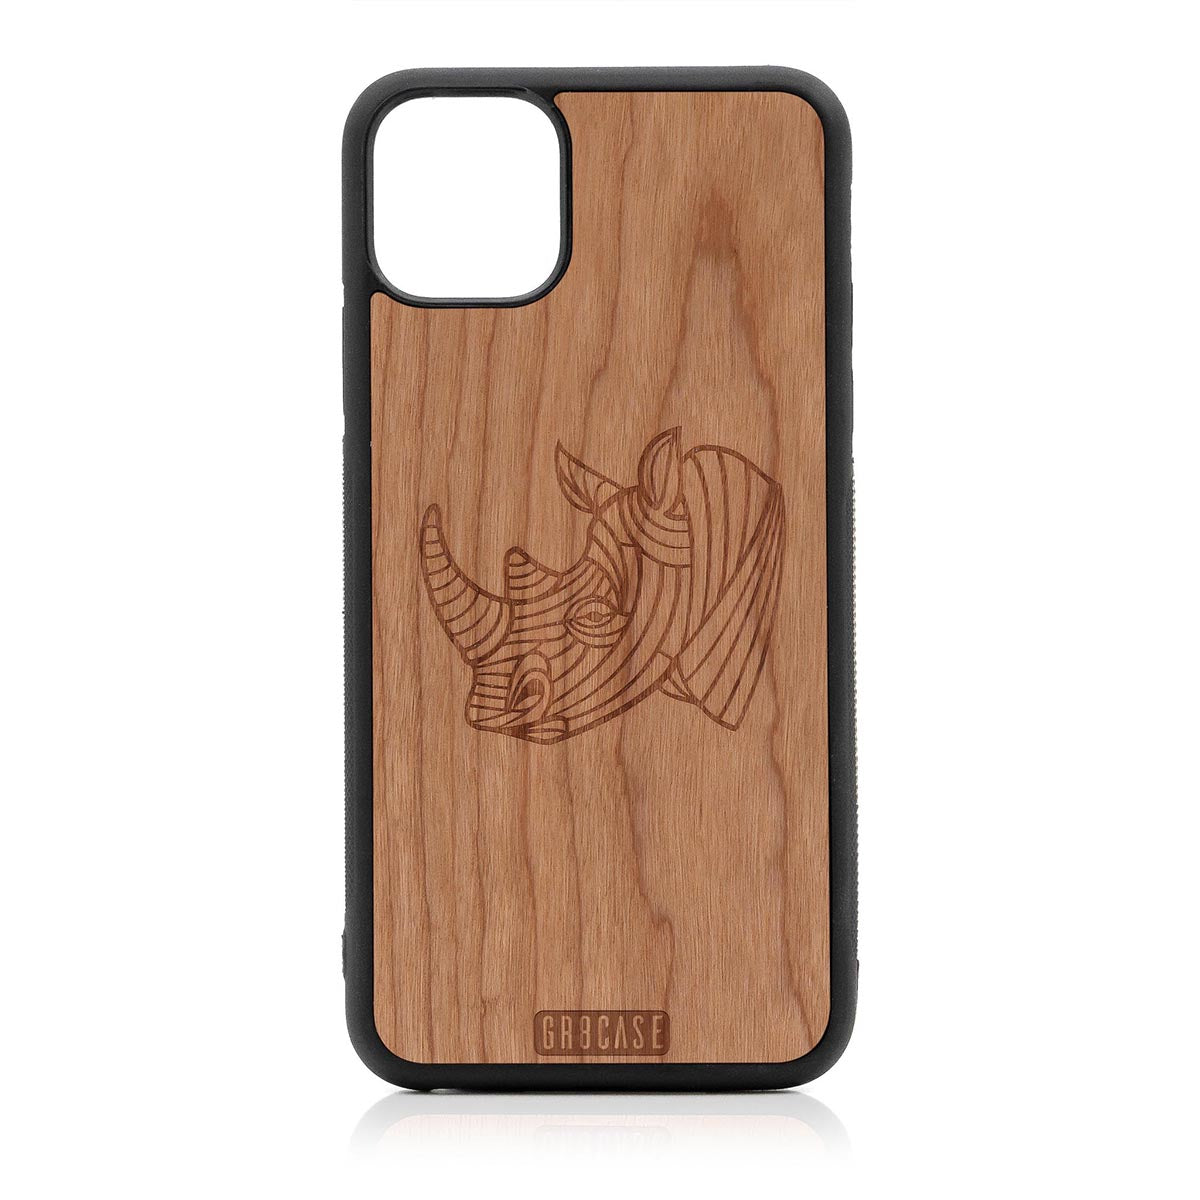 Rhino Design Wood Case For iPhone 11 Pro Max by GR8CASE